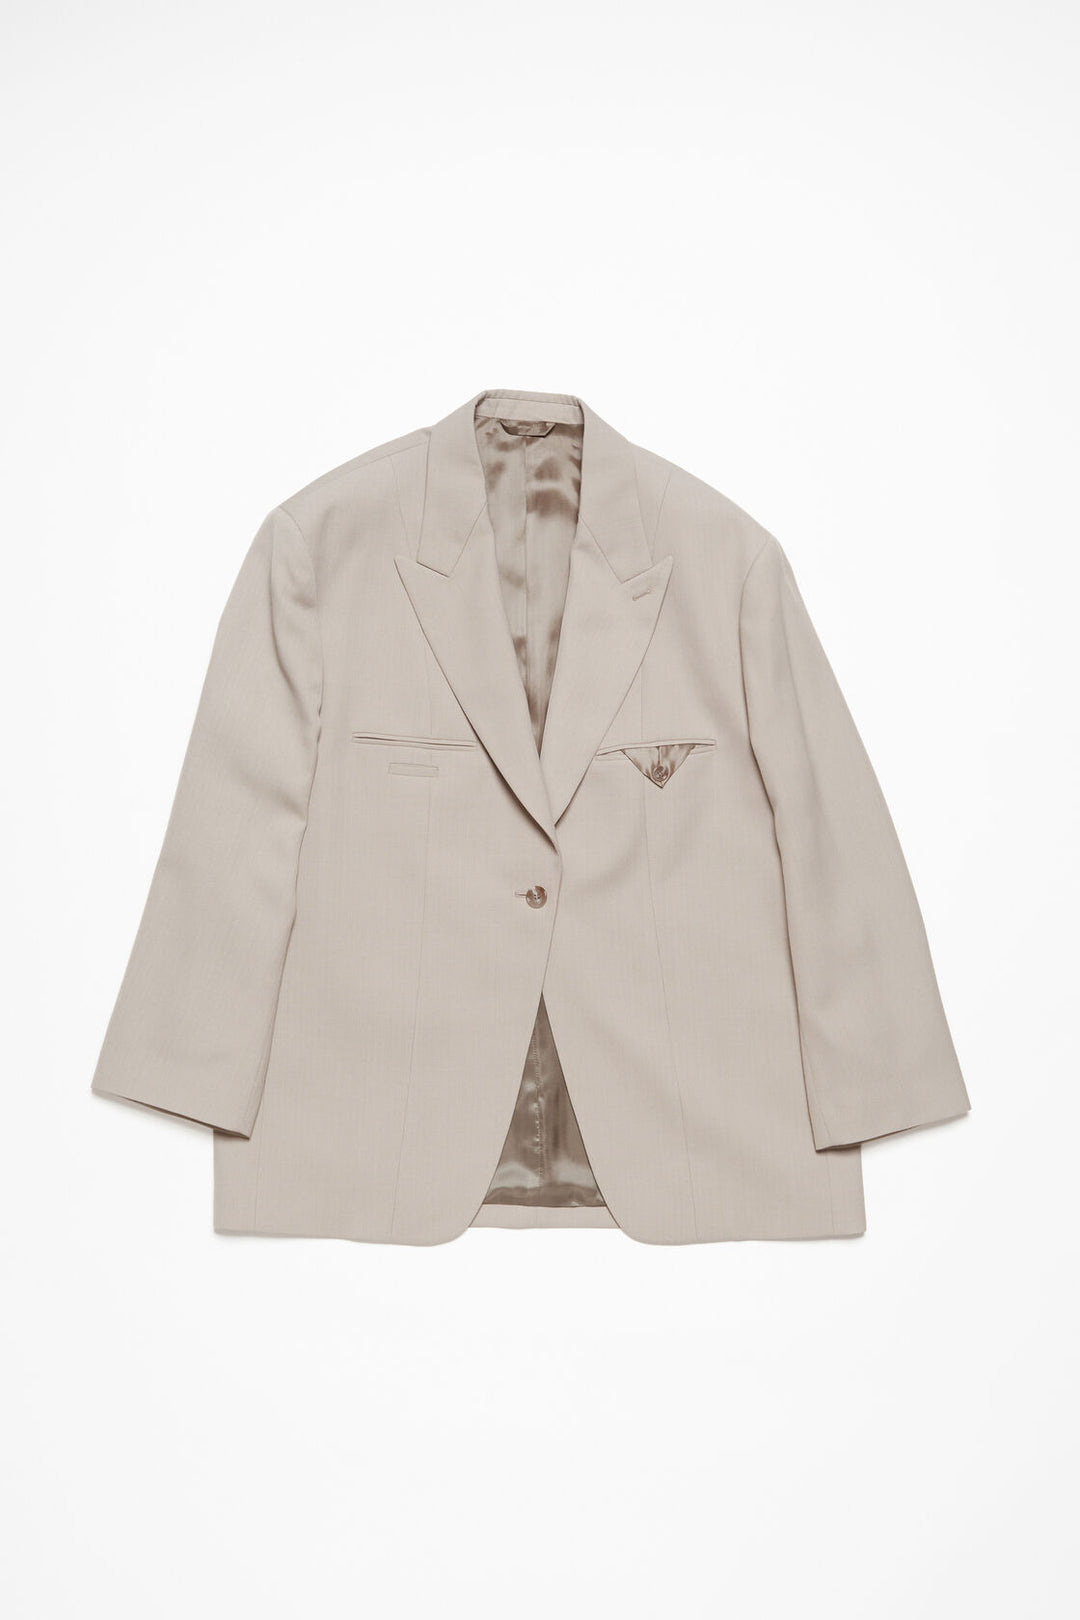 ACNE STUDIOS - Single-breasted Jacket Cold Beige - Dale